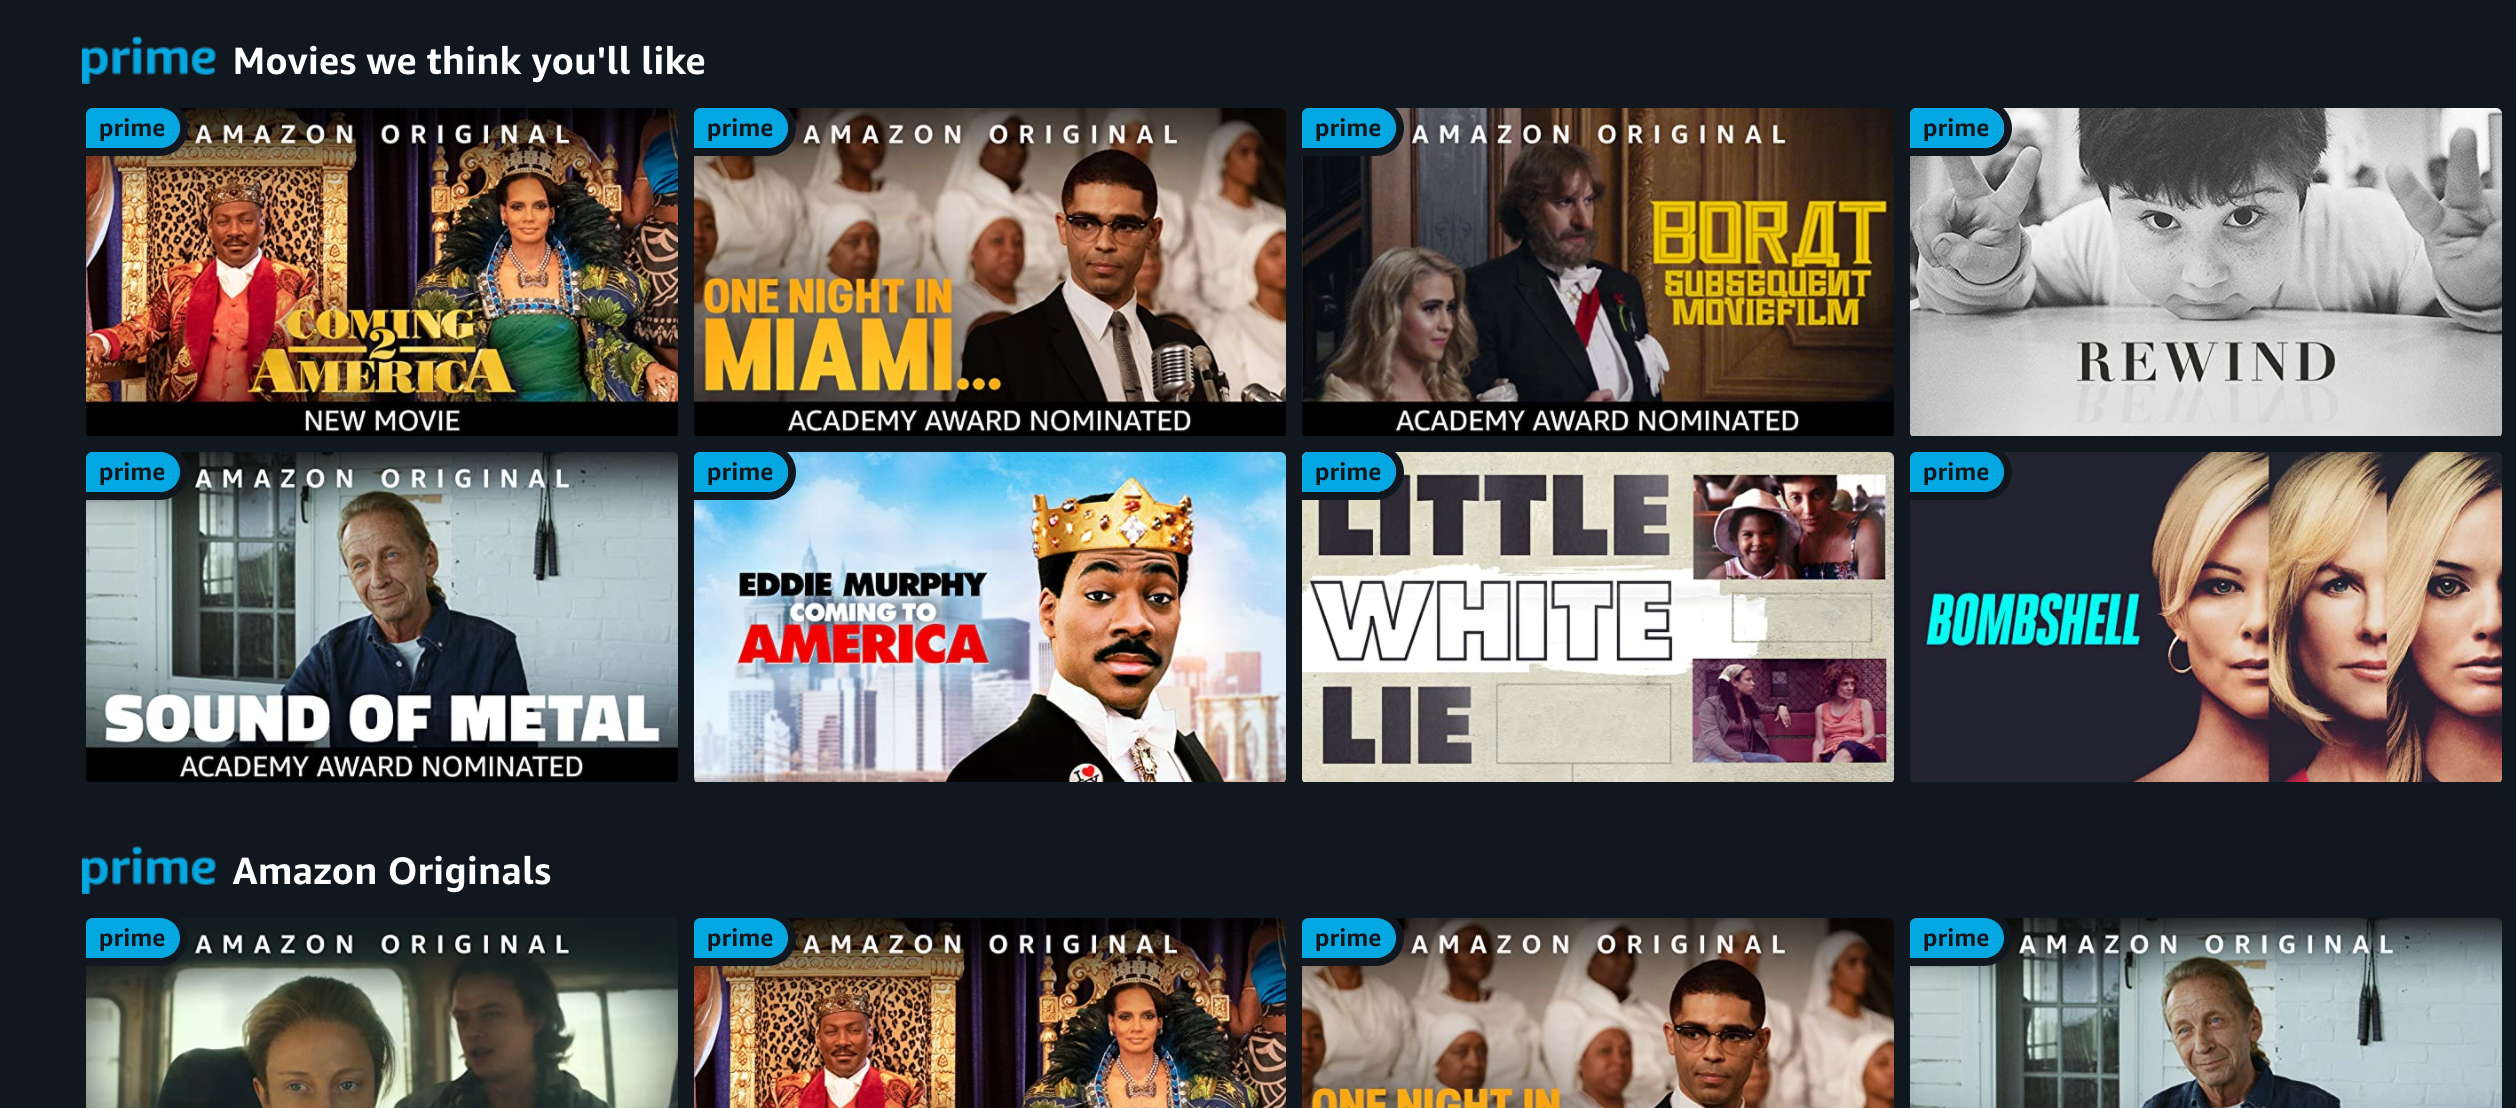 Popular movies available on Amazon Prime Video, including Coming 2 America